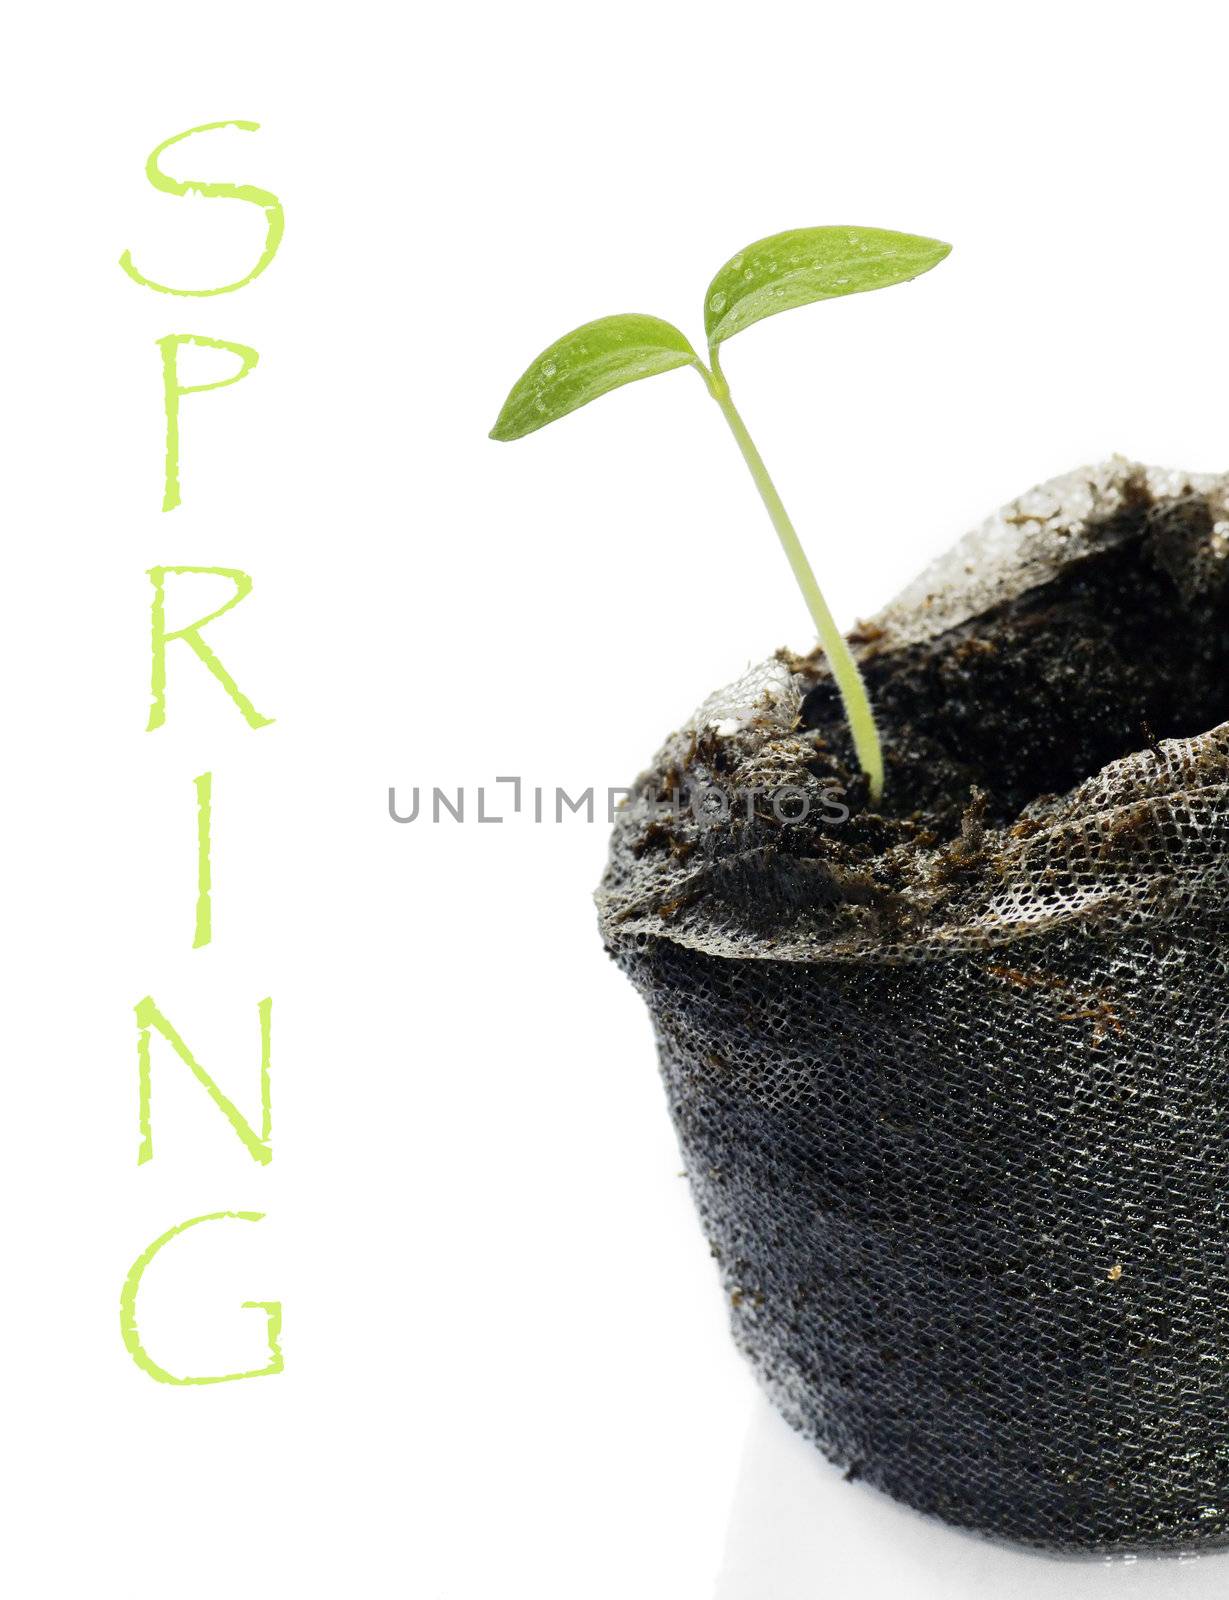 Cute baby green seedling, sprout or shoot ready to be planted during spring or on earth day with white copy space.